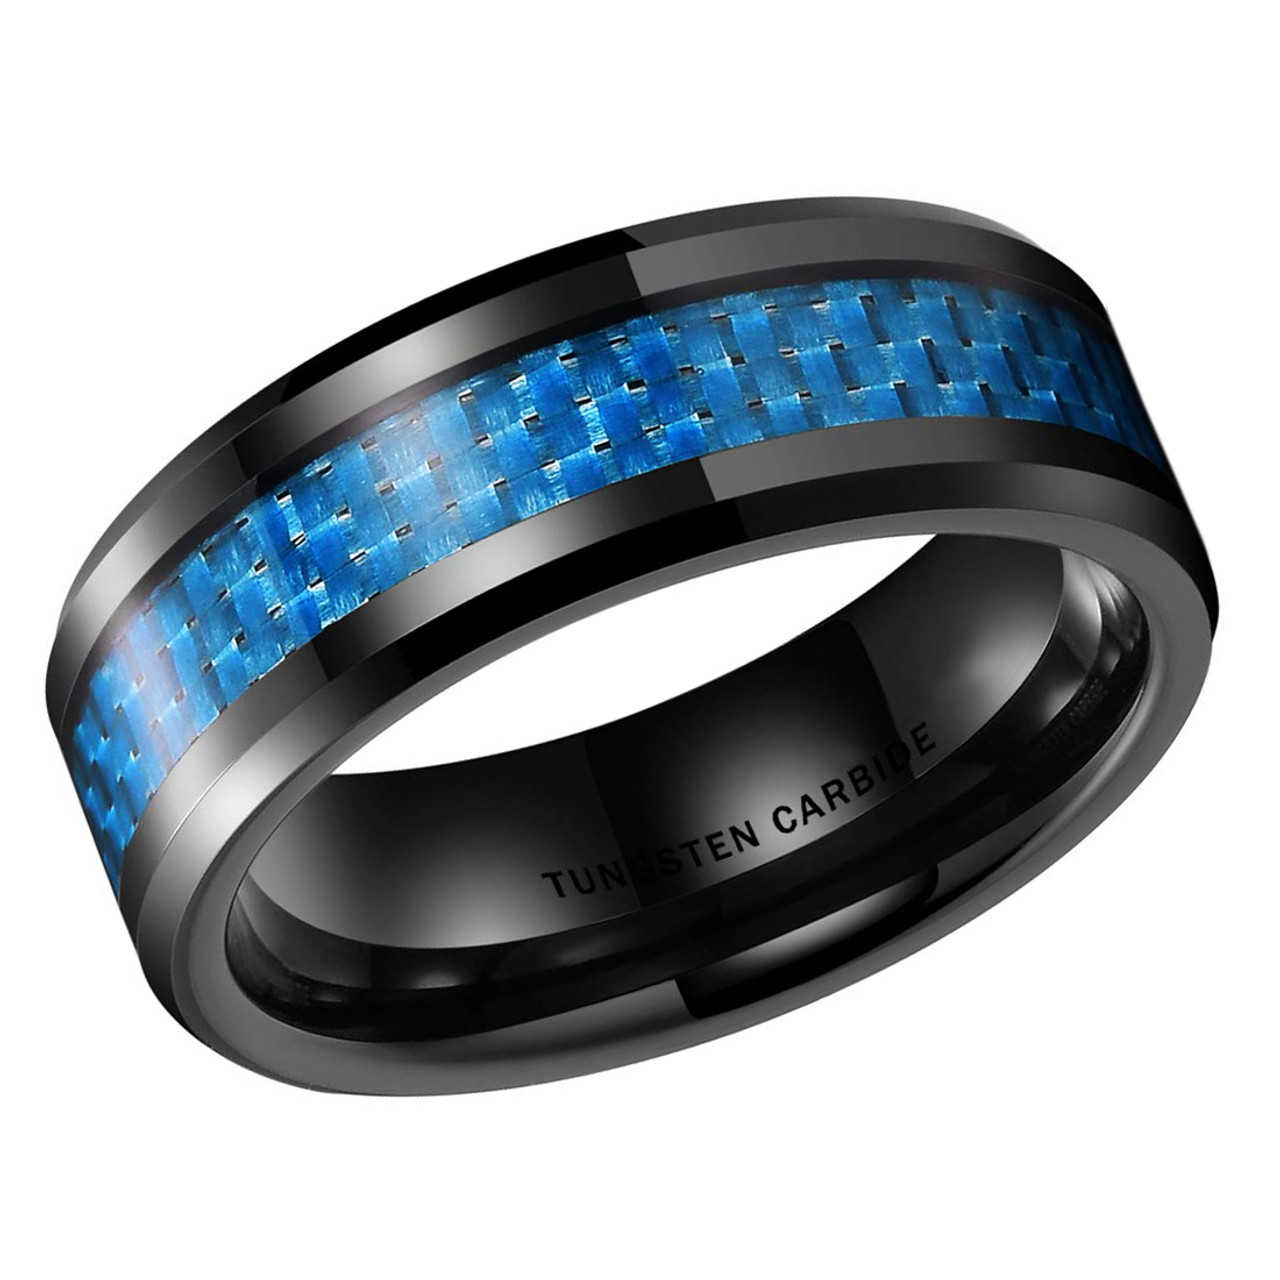 (8mm) Unisex or Men's Tungsten Carbide Wedding Ring Bands. Black Ring with Sky Blue Carbon Fiber Inlay.